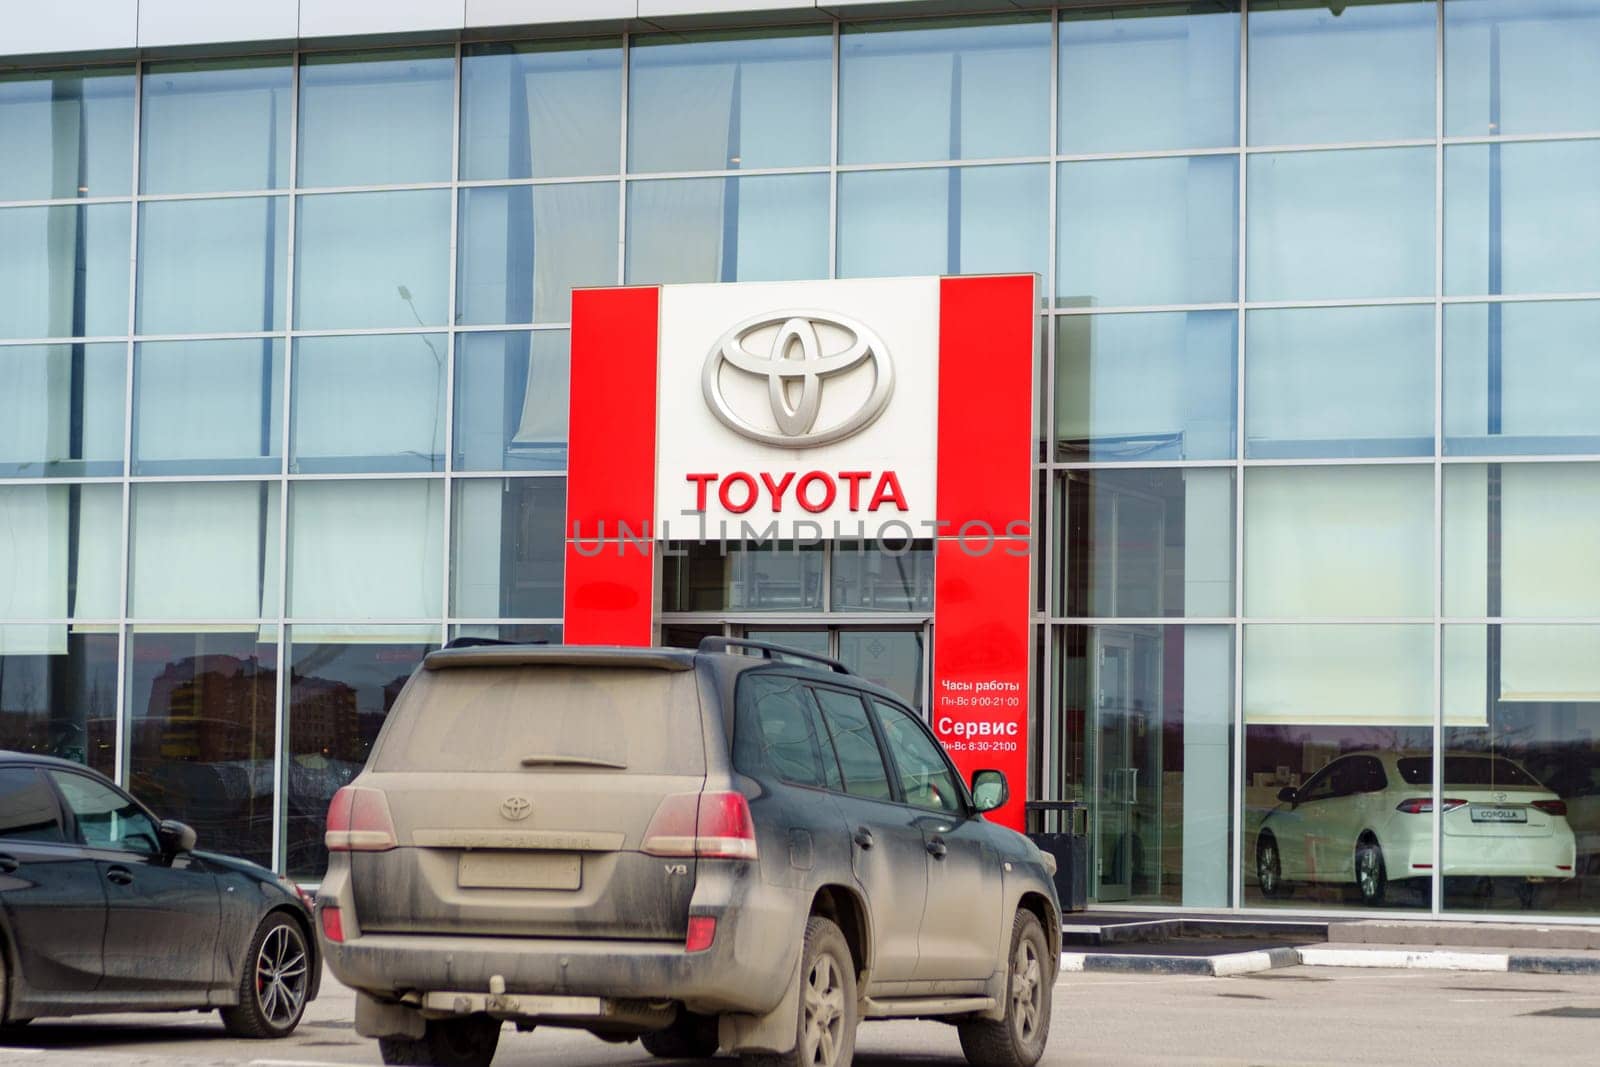 Tyumen, Russia-March 02, 2024: Toyota logo Sign Against Blue Sky. Selective focus